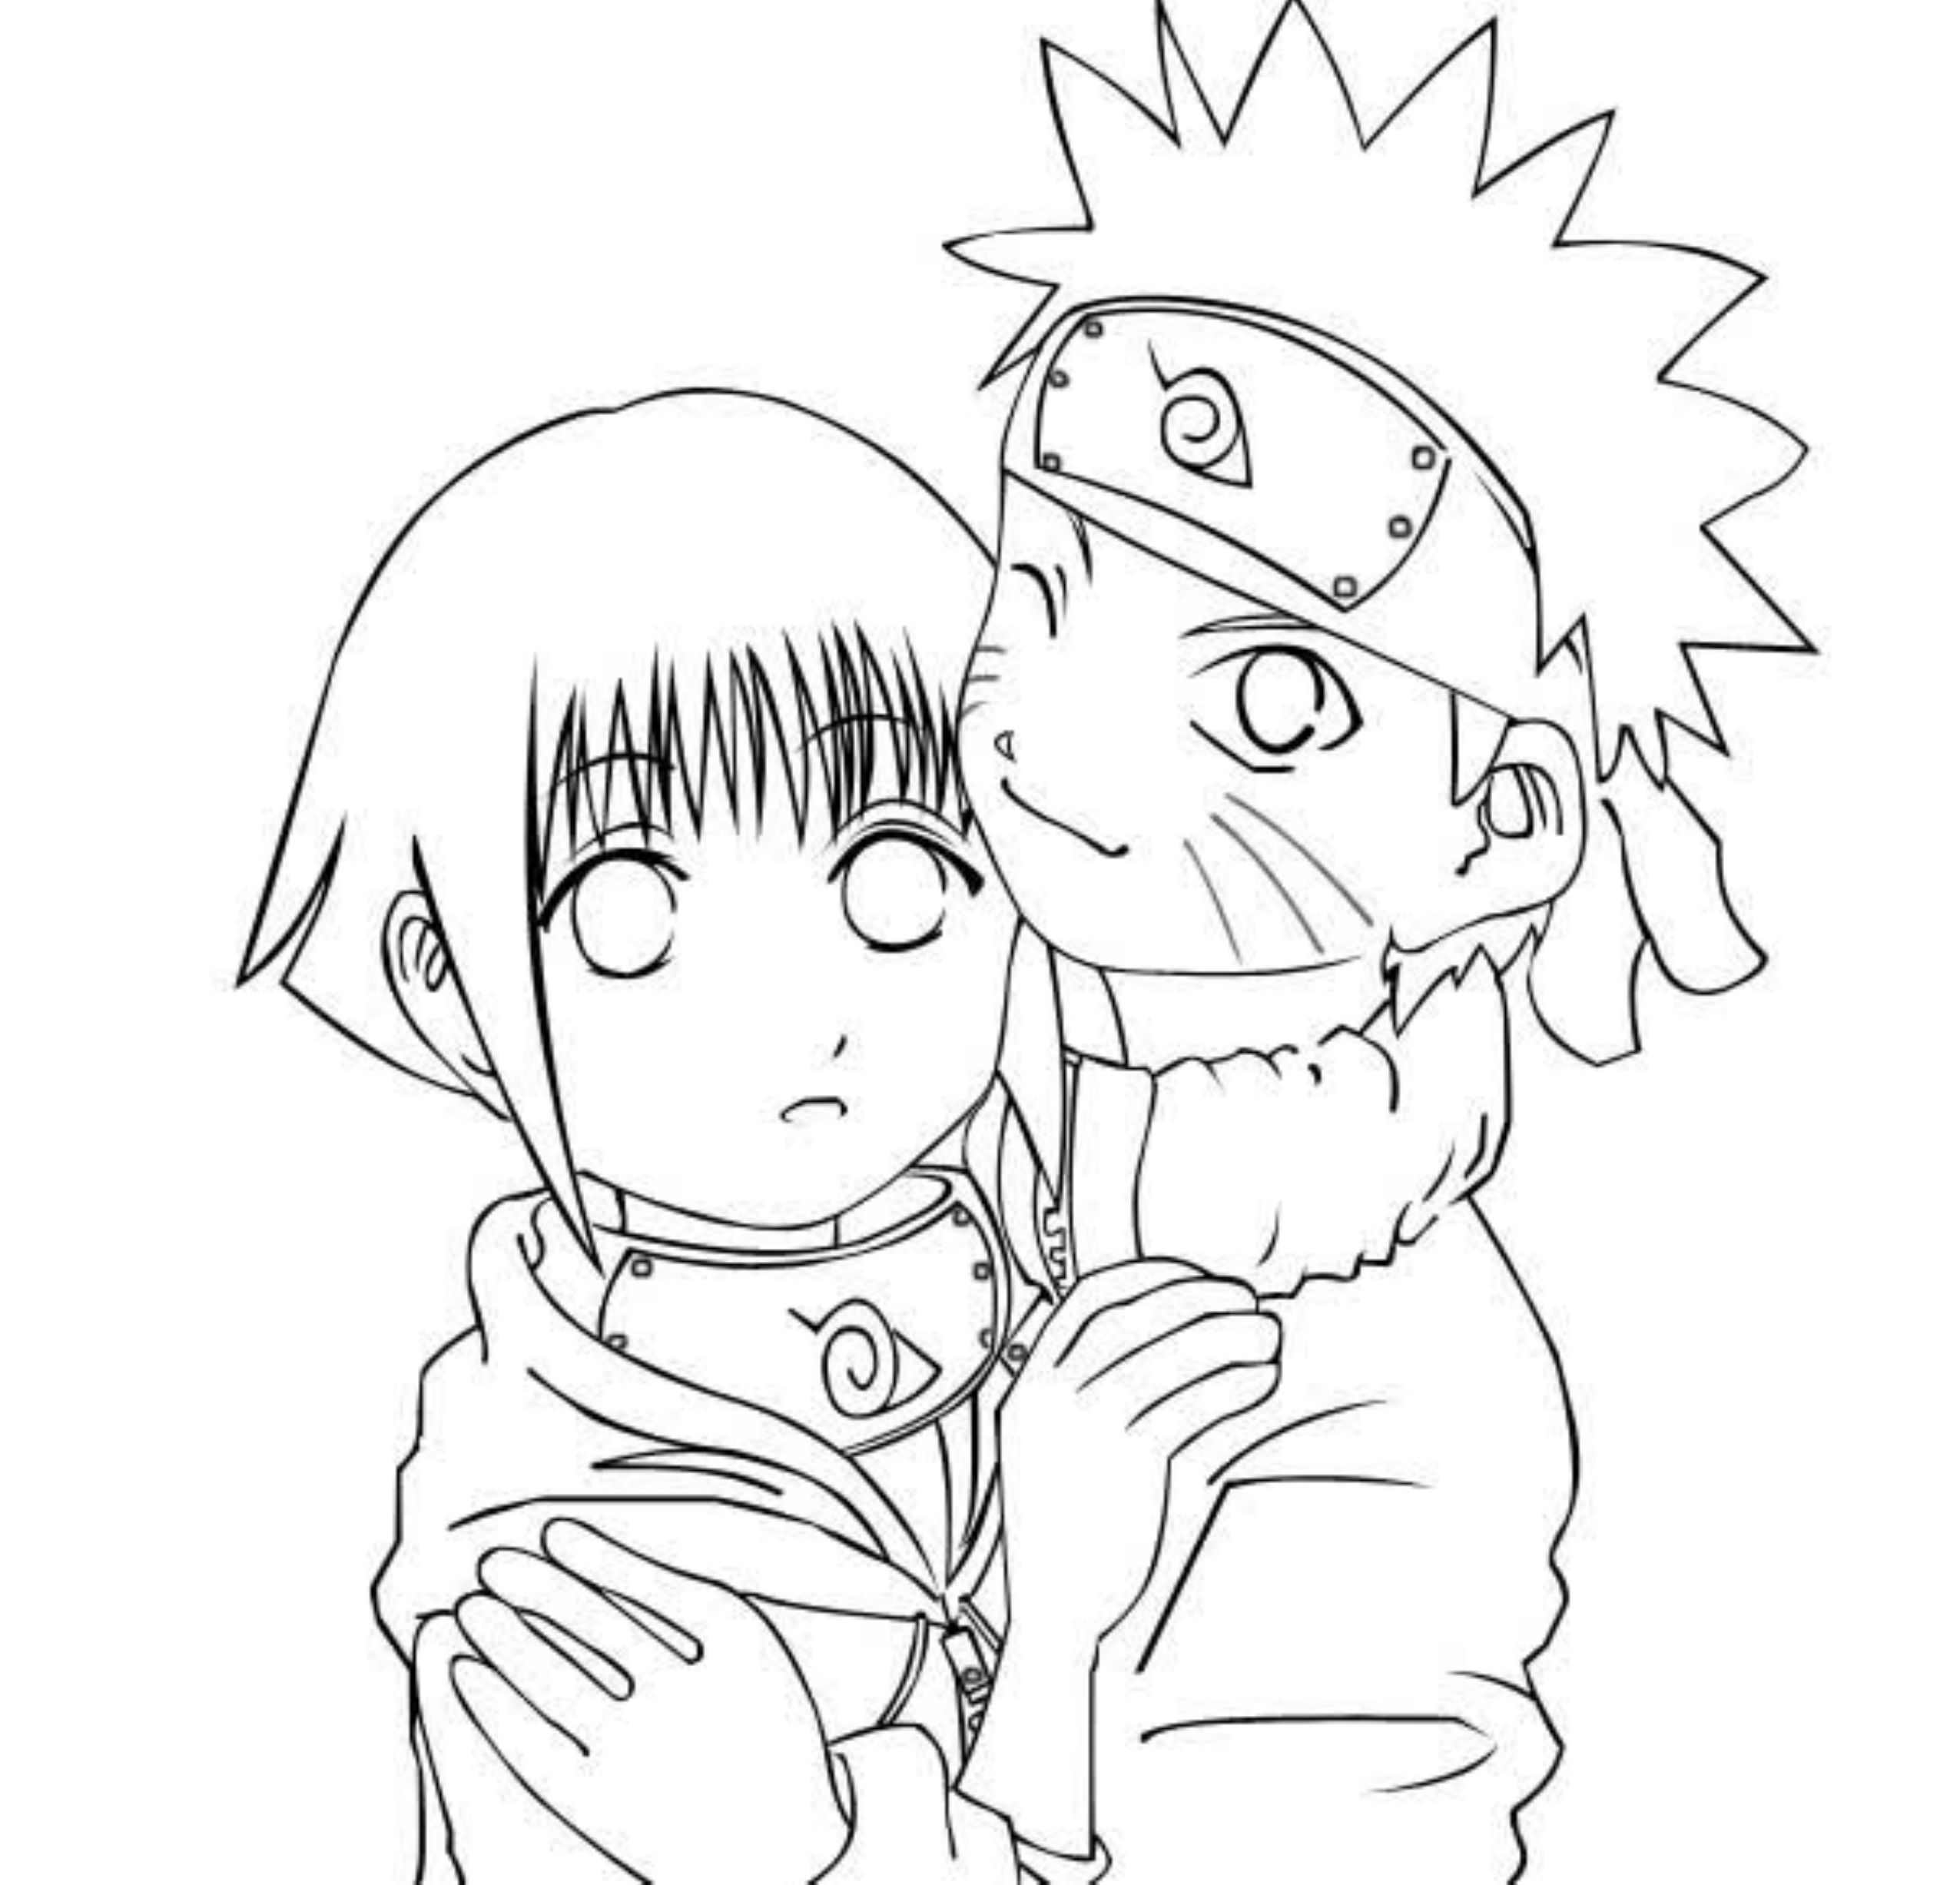 Naruto shippuden coloring pages to download and print for free